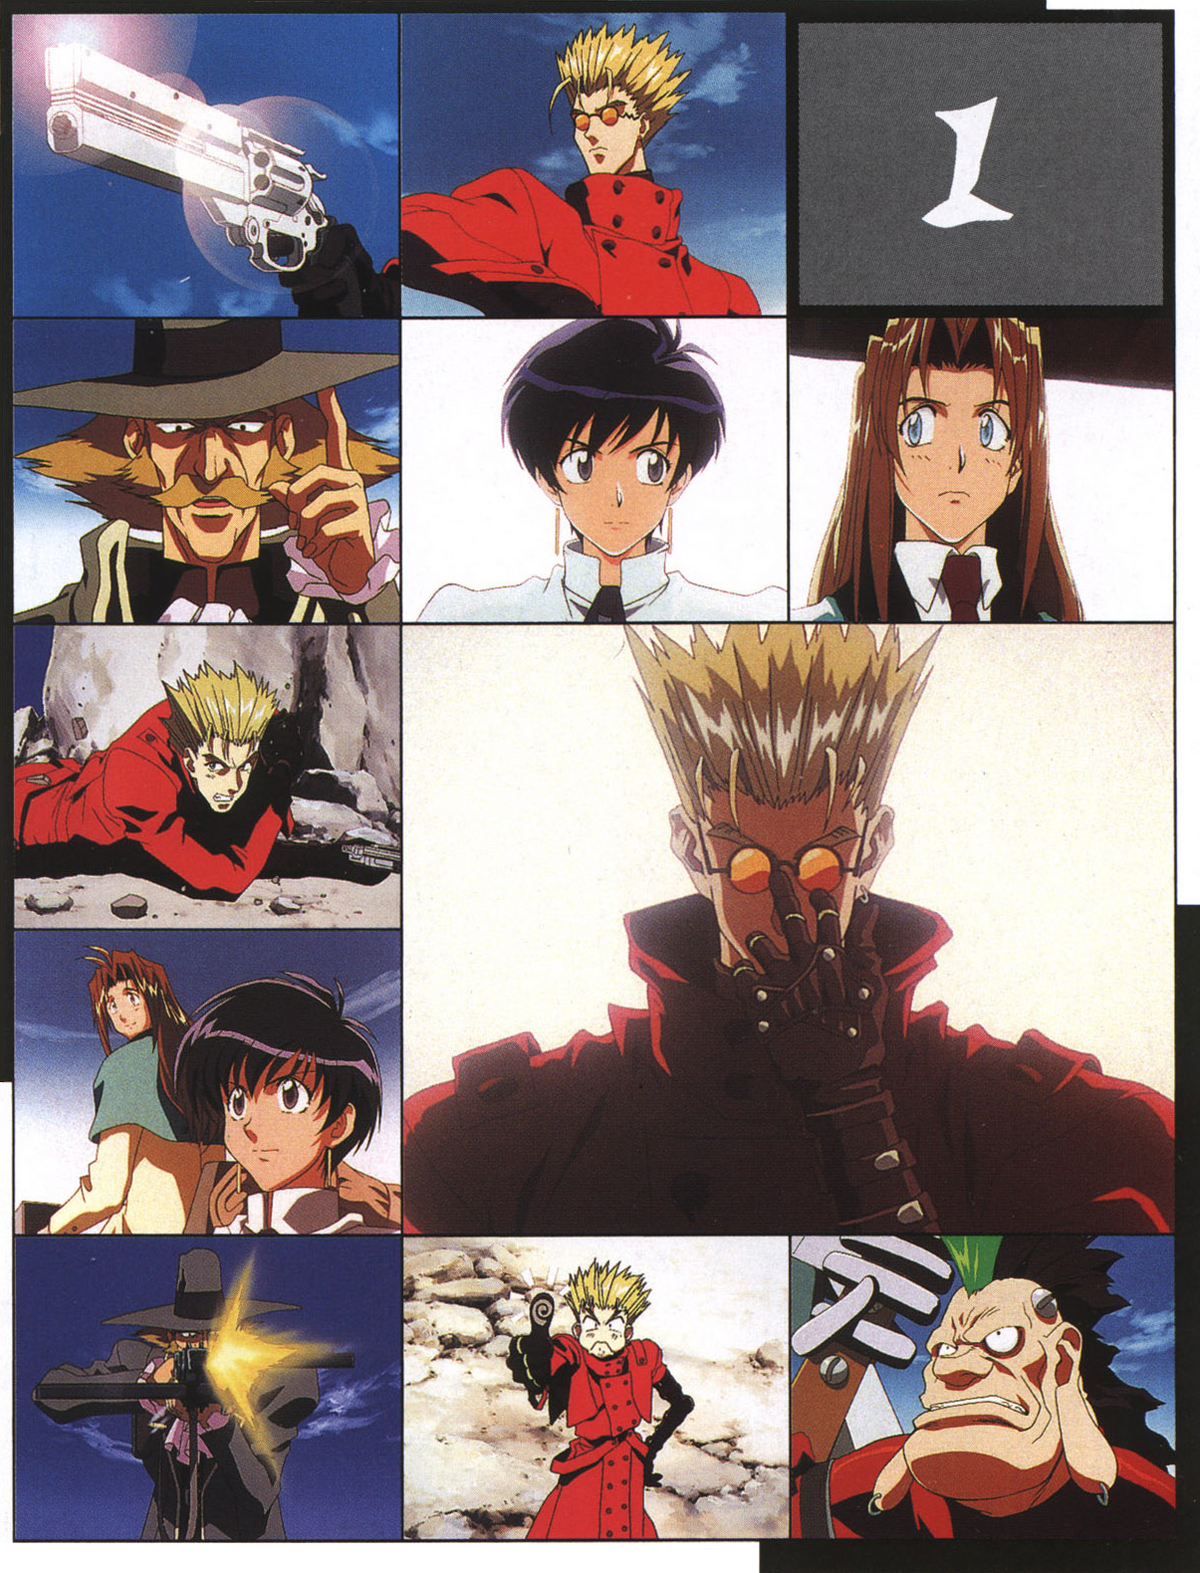 Vash the Stampede | Anime-Planet